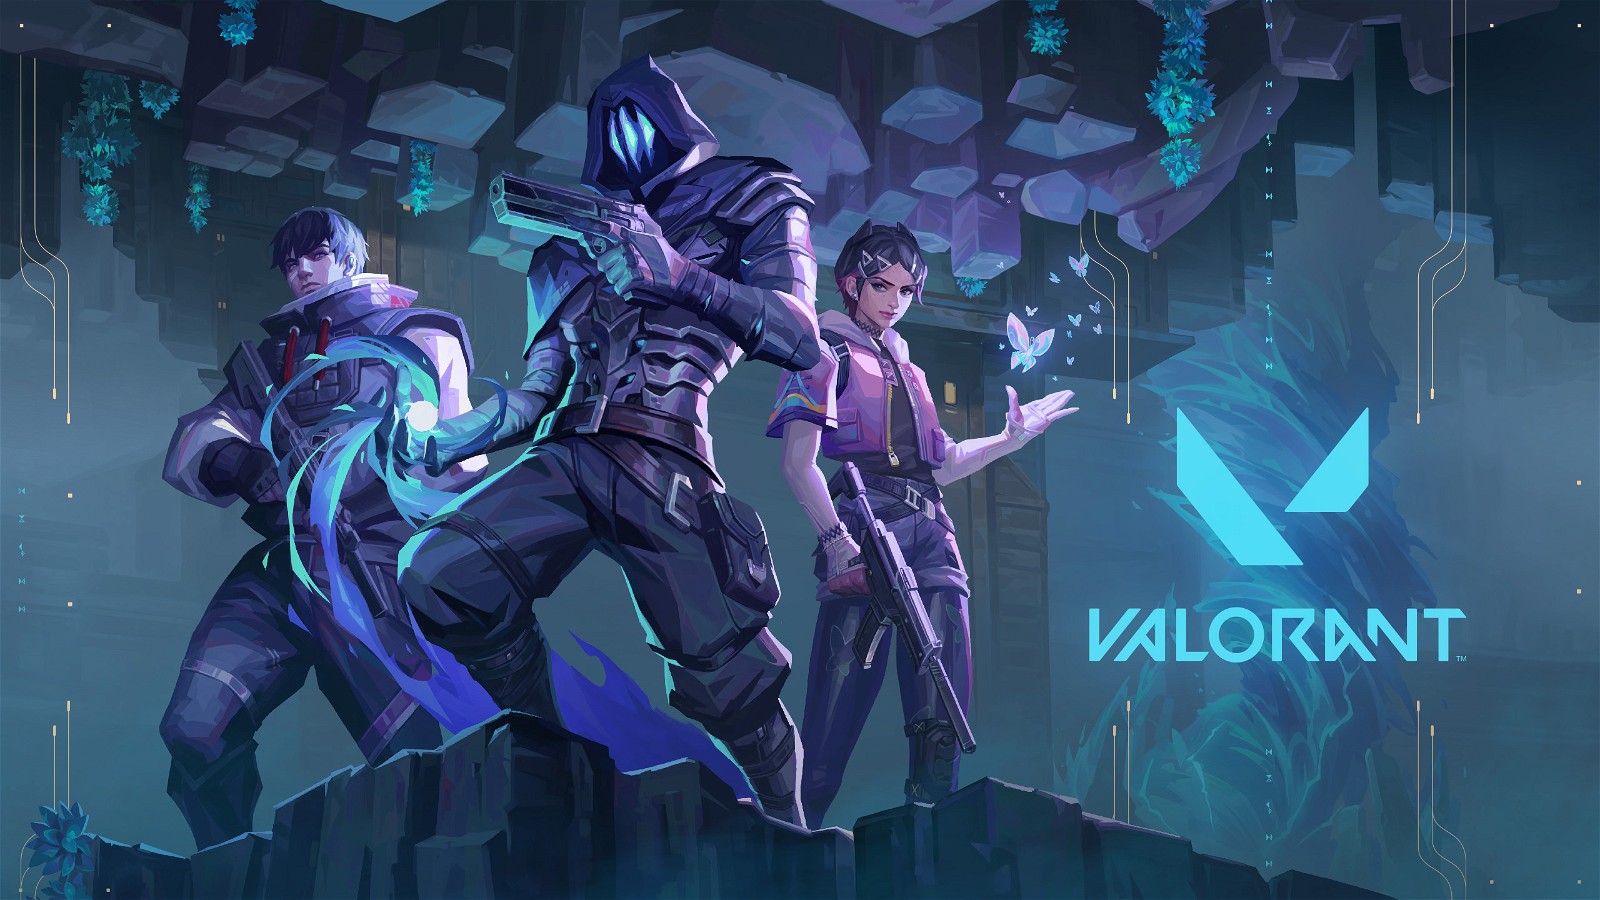 Valorant has emerged as one of the best games to watch in recent years